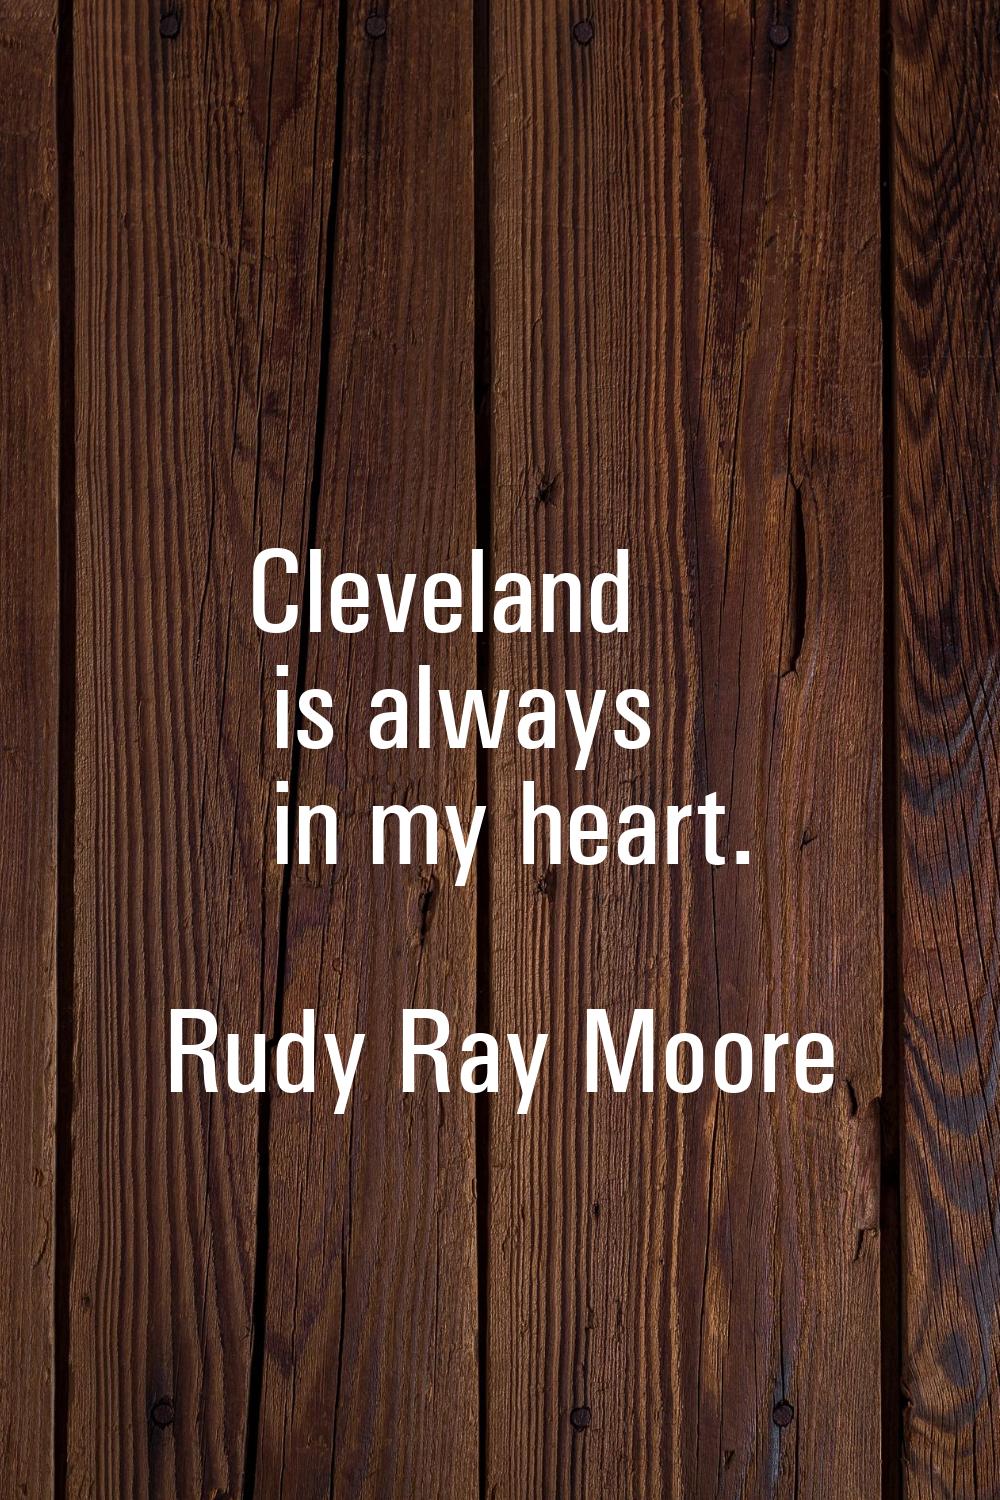 Cleveland is always in my heart.